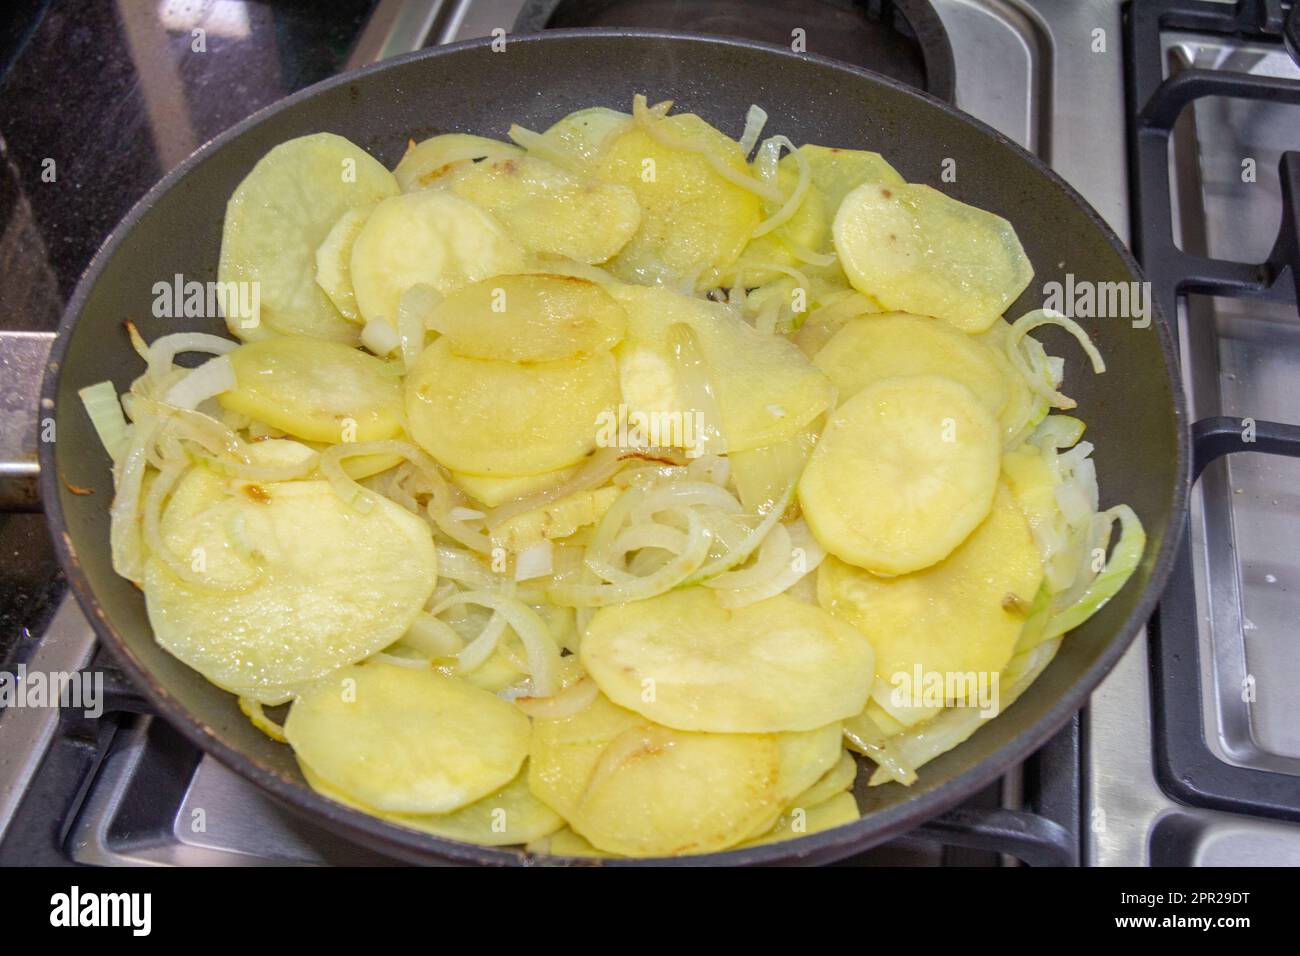 Frying a Spanish omelette or tortilla on a gas powered hob. Stock Photo